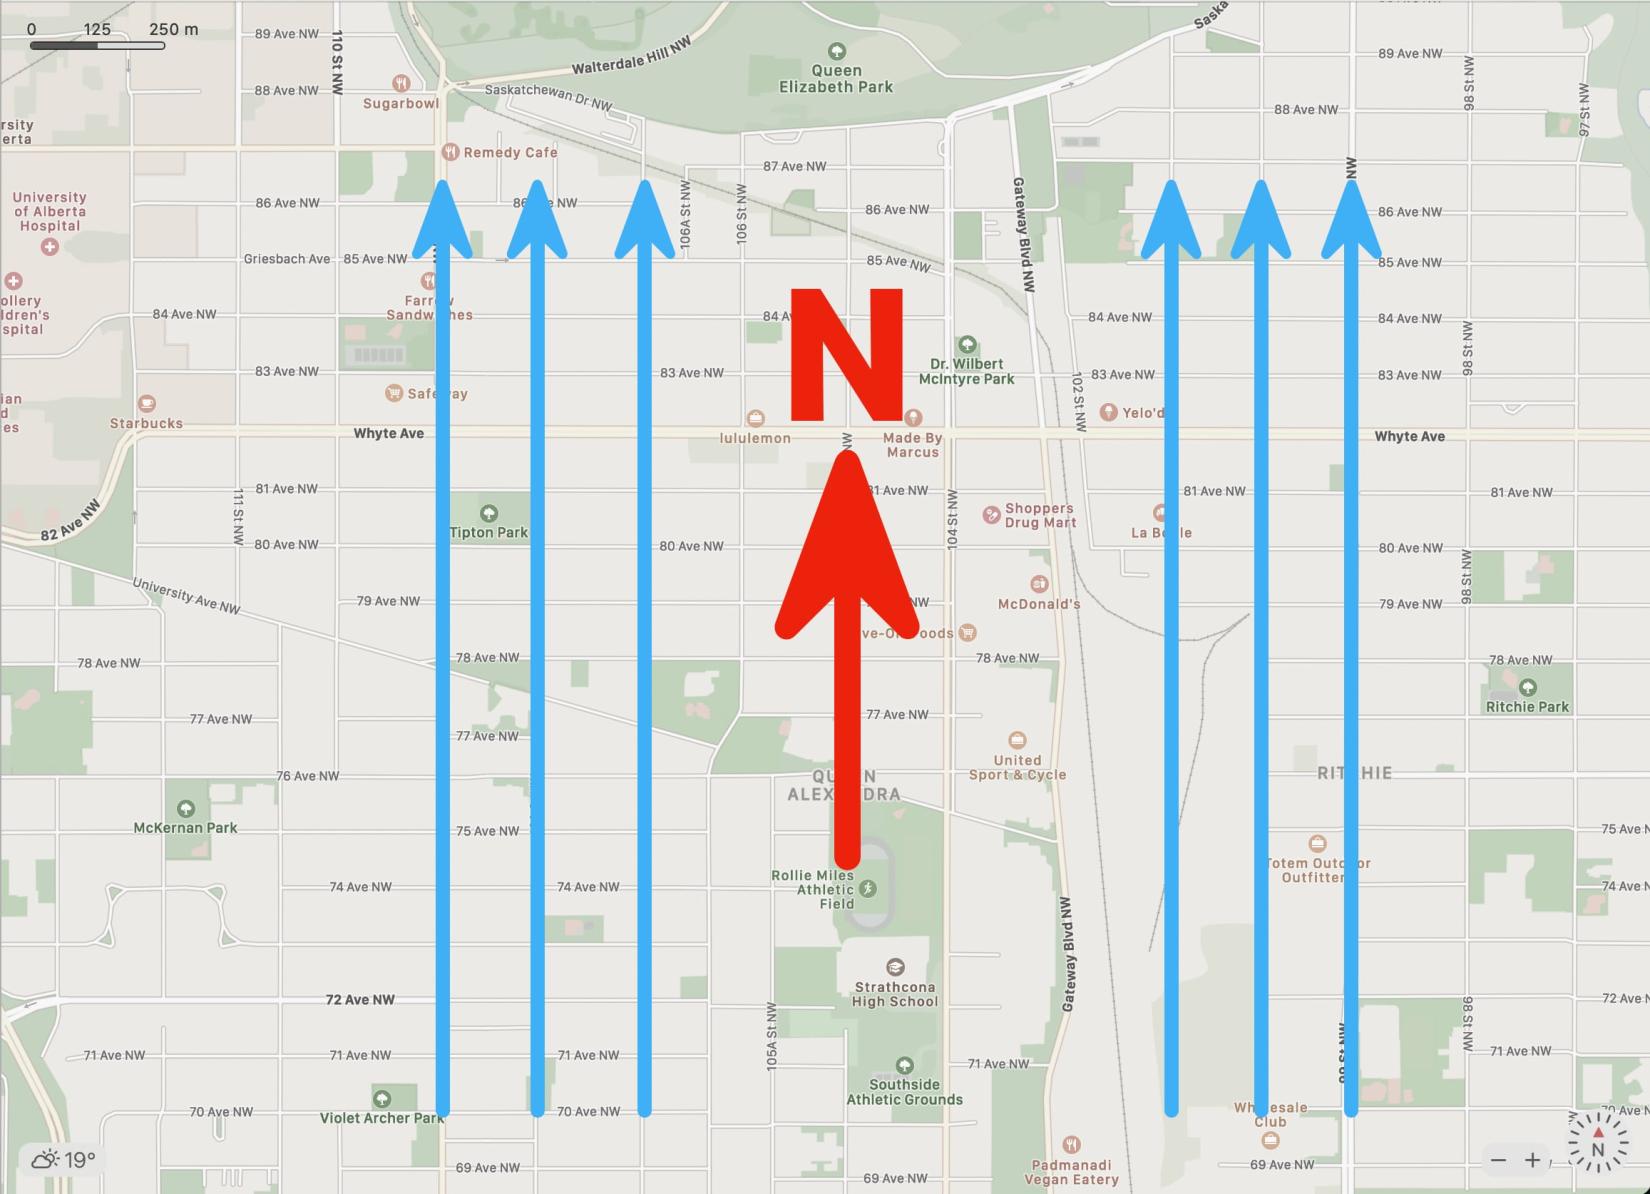 Map of Edmonton showing the streets line up North-South